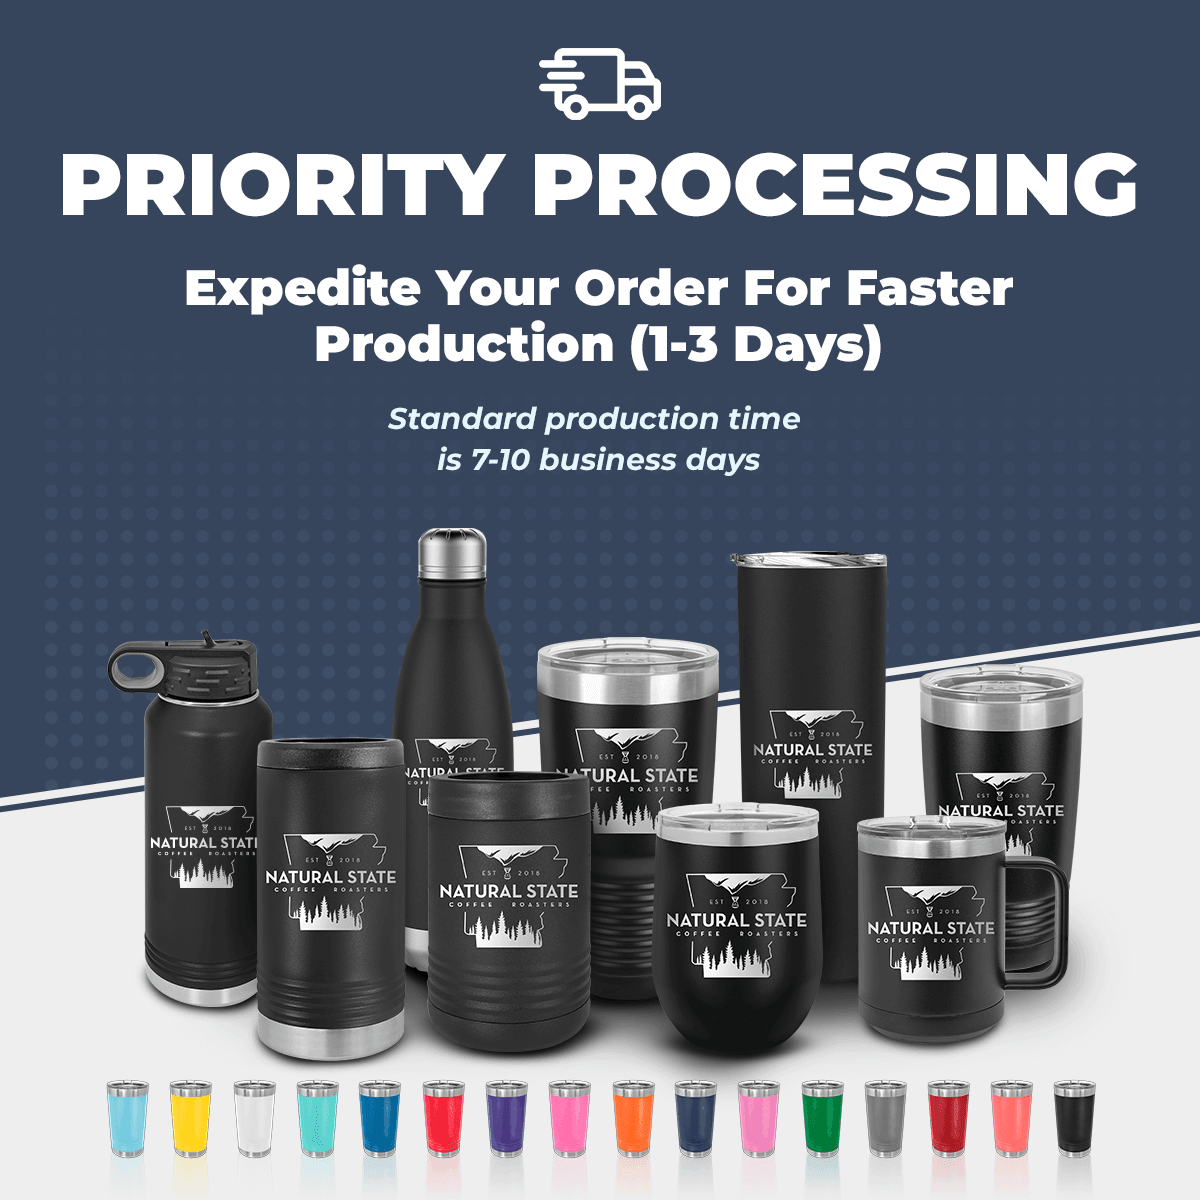 Kodiak Wholesale's Priority Processing - Expedite Your Order for Faster Production (1-3 Day - Production) helps expedite your order, ensuring a faster production time.